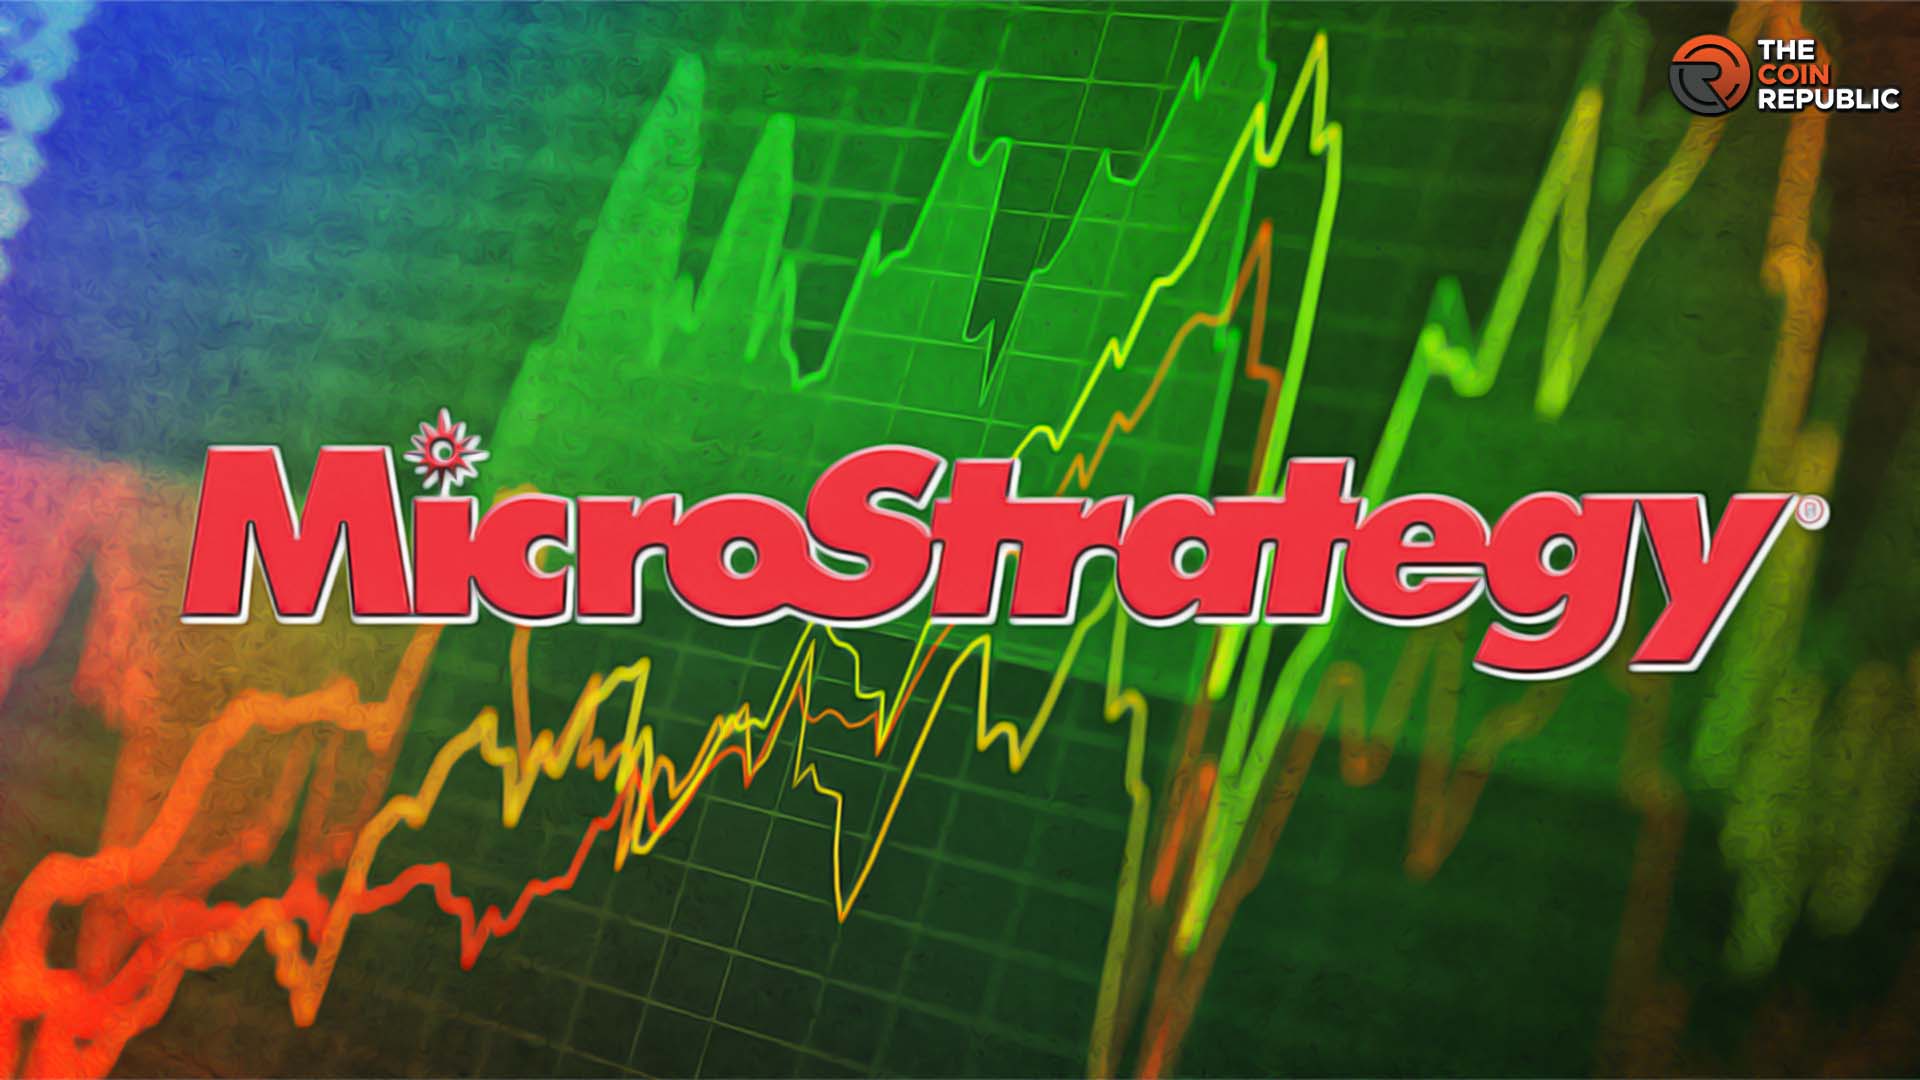 Microstrategy Stock: Will MSTR Stock Regain the $400 Mark in Sep?